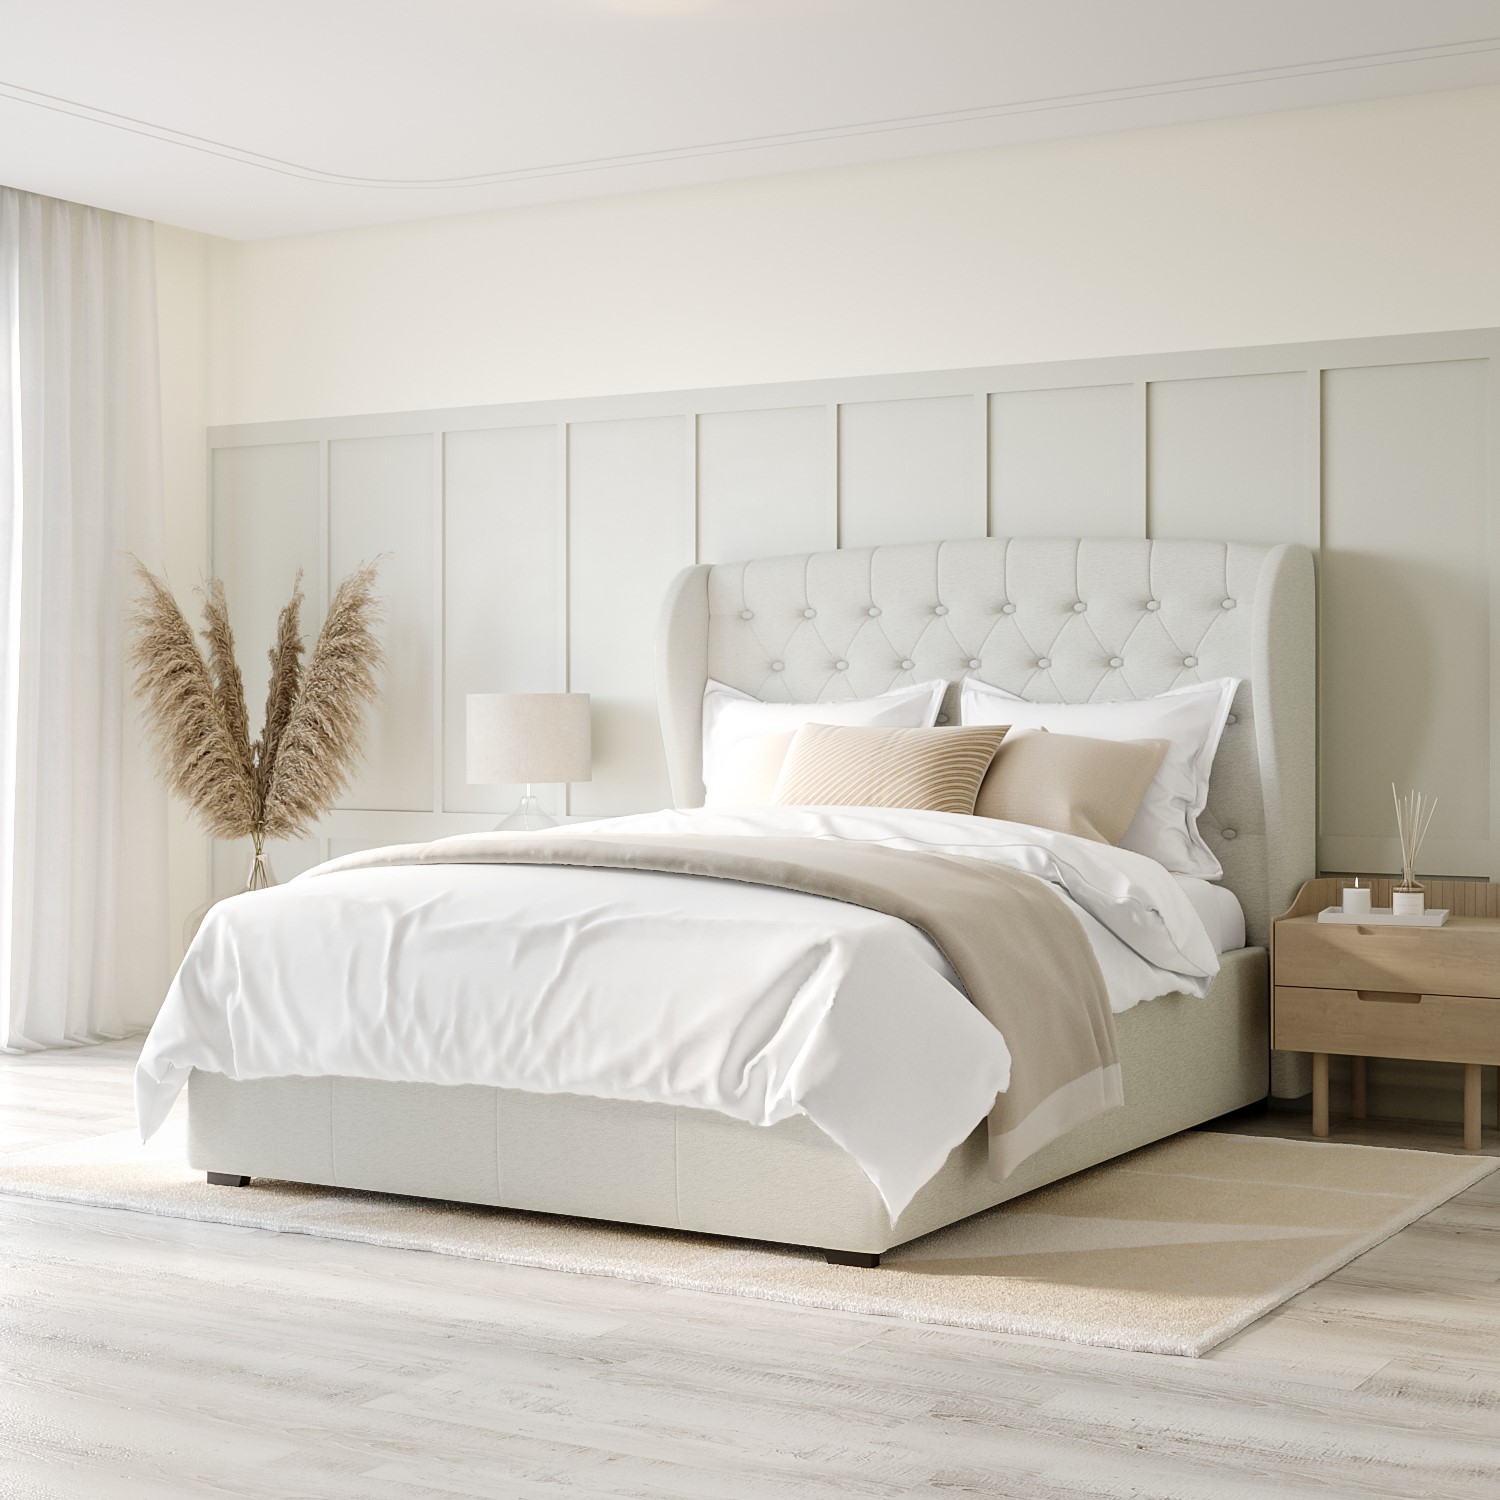 Read more about Cream fabric double ottoman bed with winged headboard safina